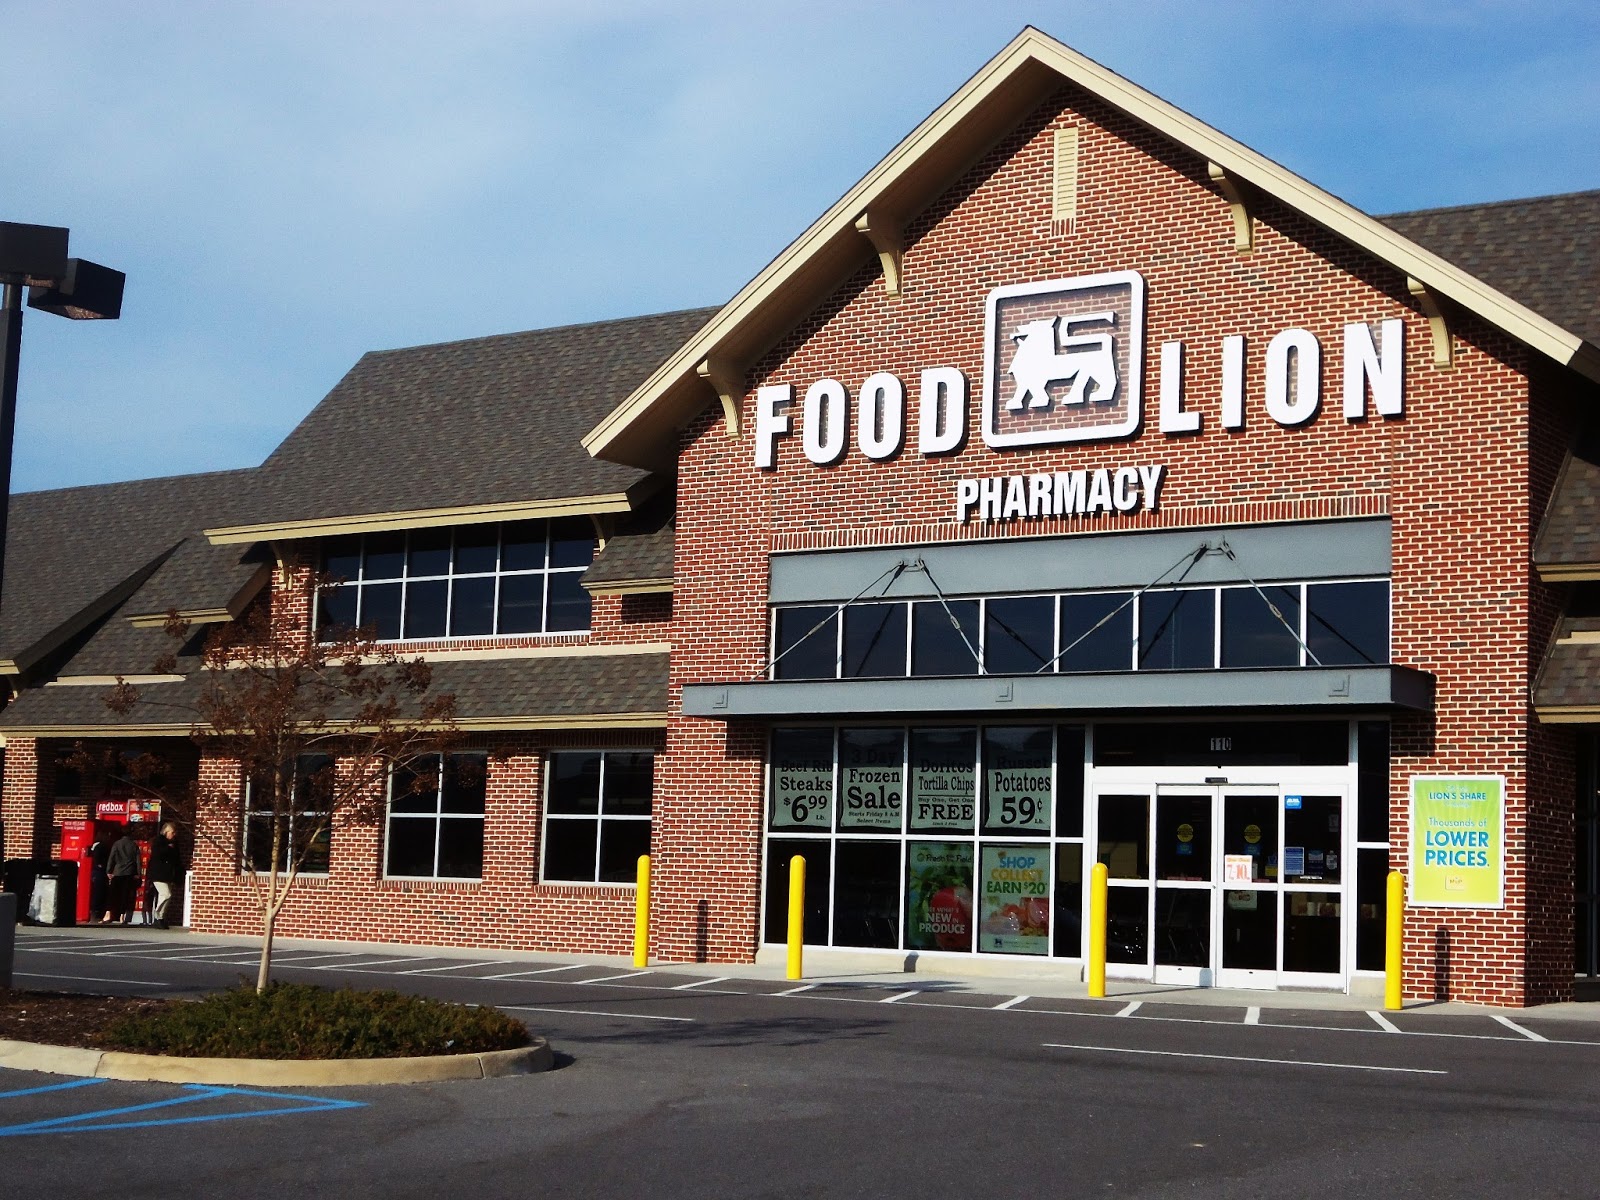 Around Roanoke, VA (A Daily Photo Blog): Signs, Signs - Food Lion